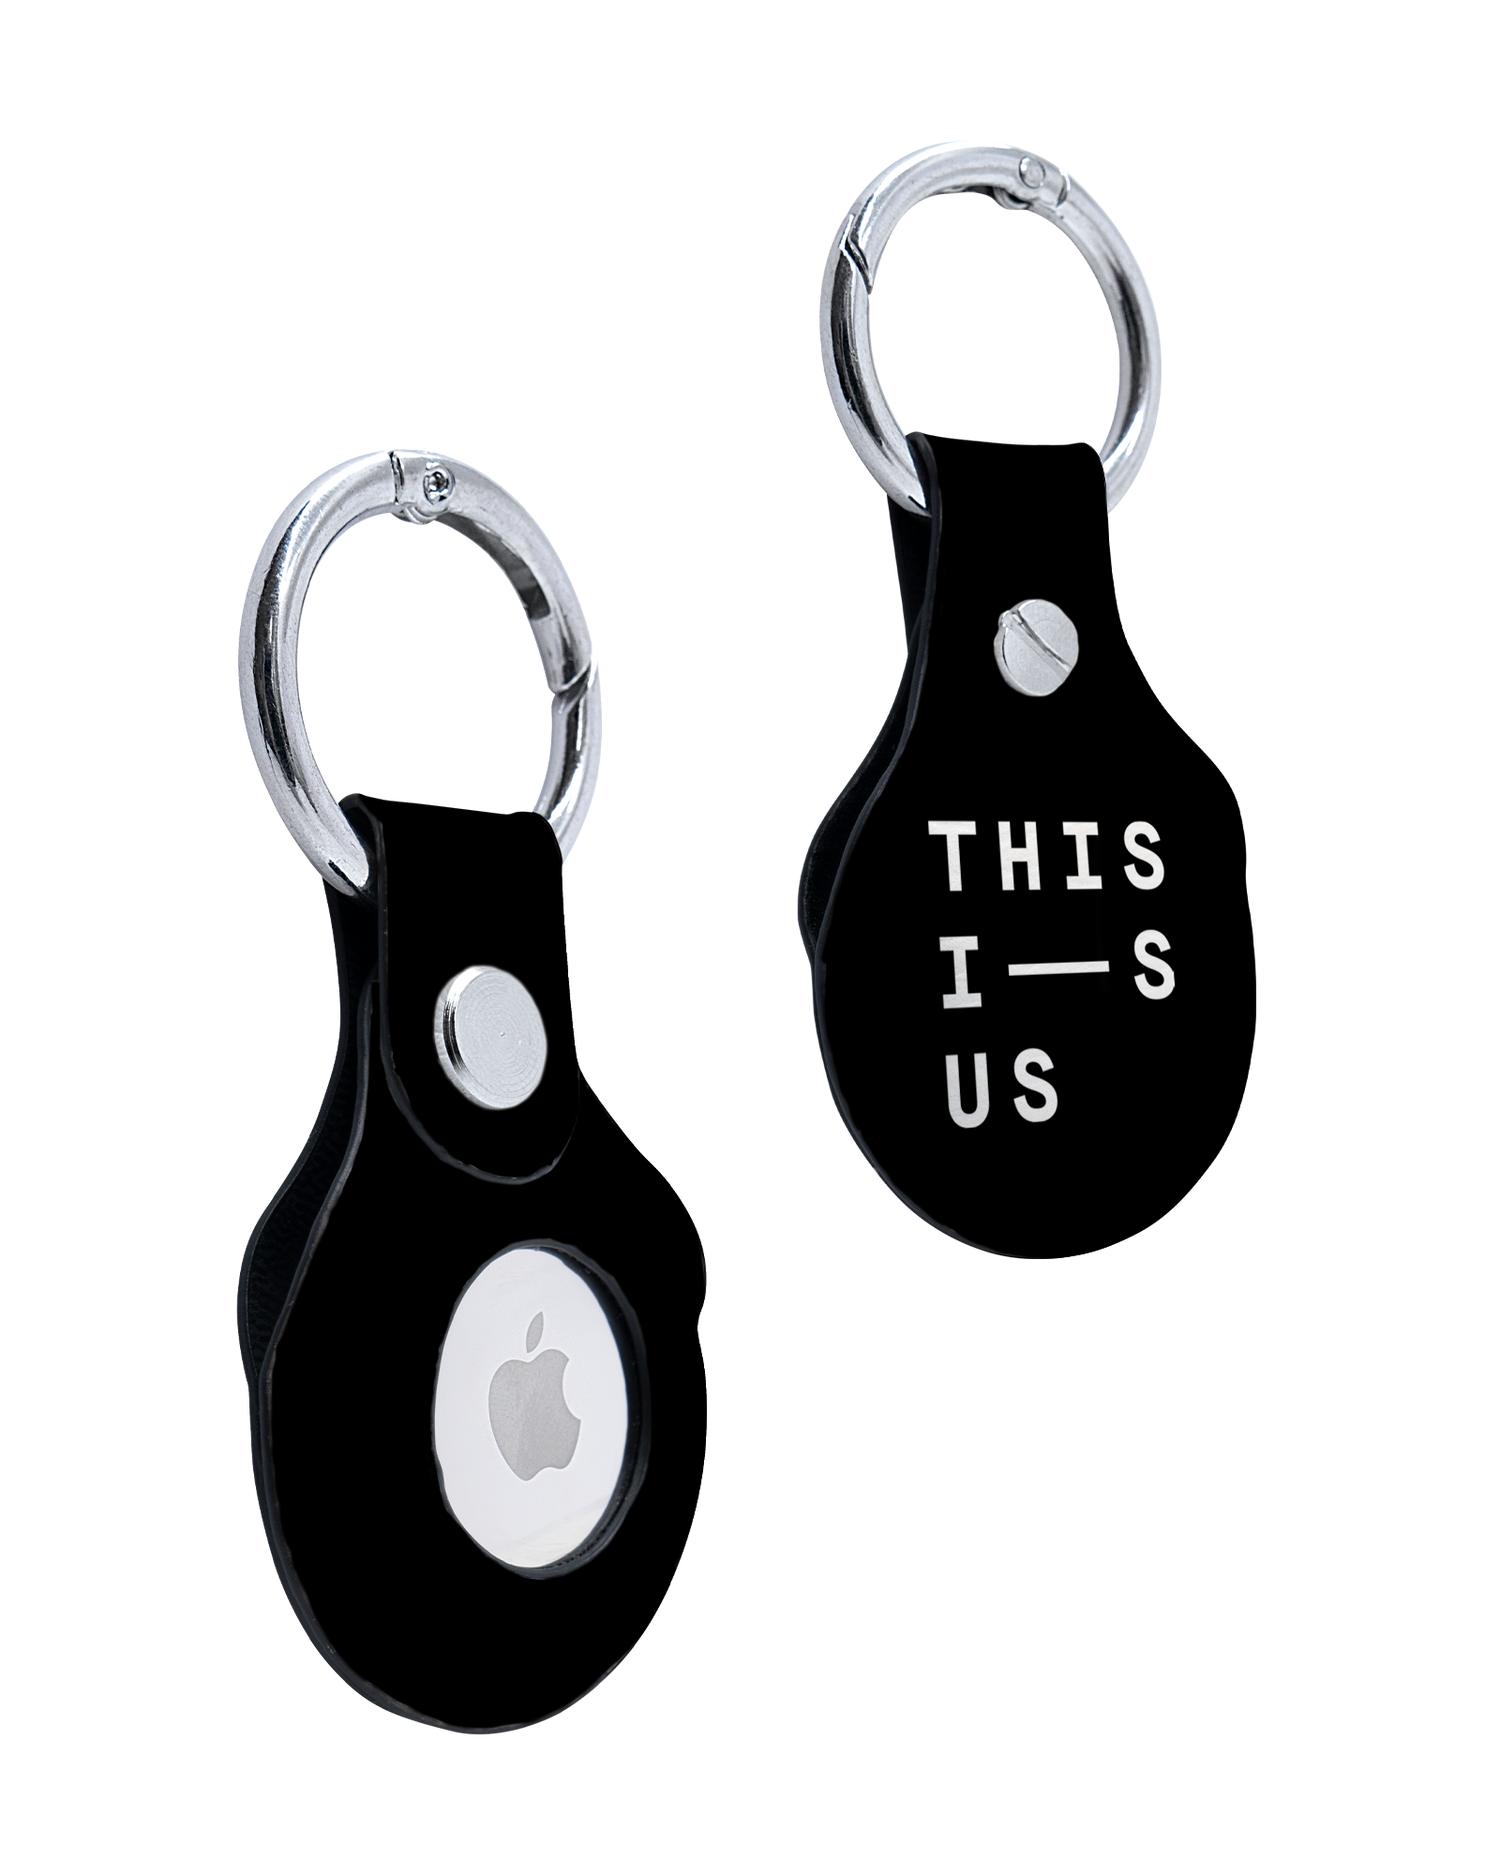 AirTag Holder with This Is Us Design: Front and Back